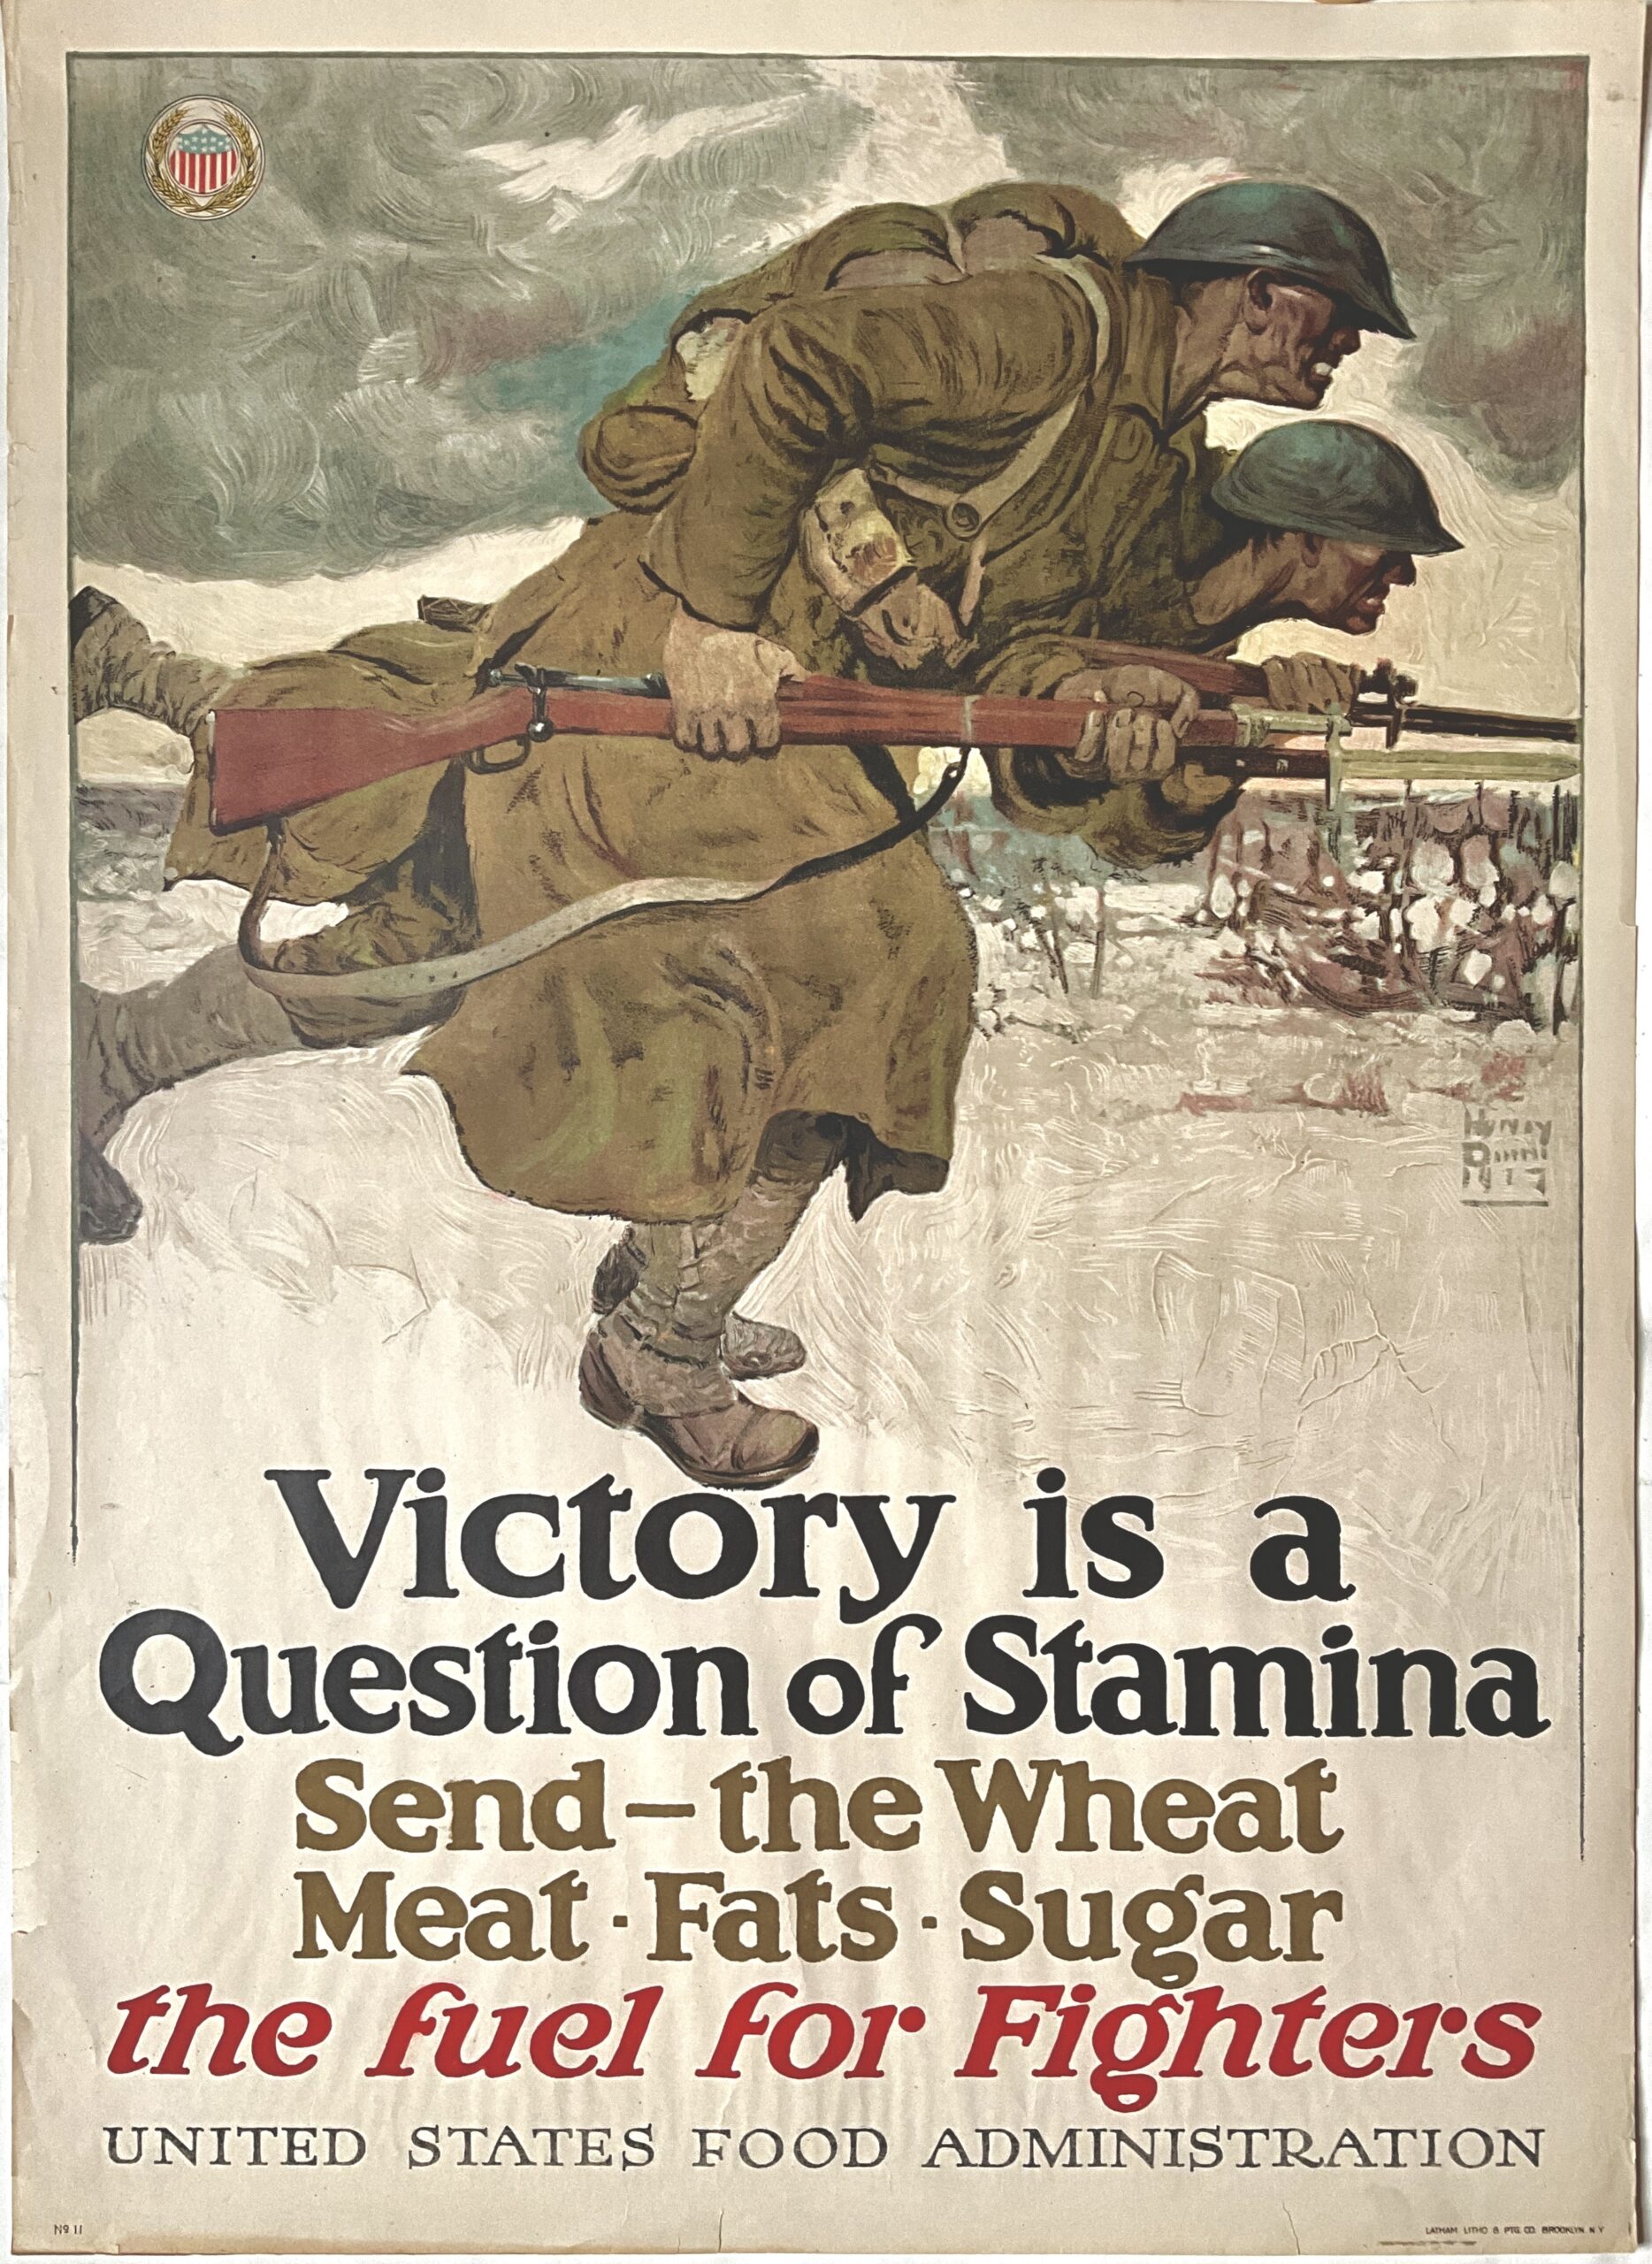 ST39	VICTORY IS A QUESTION OF STAMINA - SEND - THE WHEAT - MEAT - FATS - SUGAR - THE FUEL FOR FIGHTERS